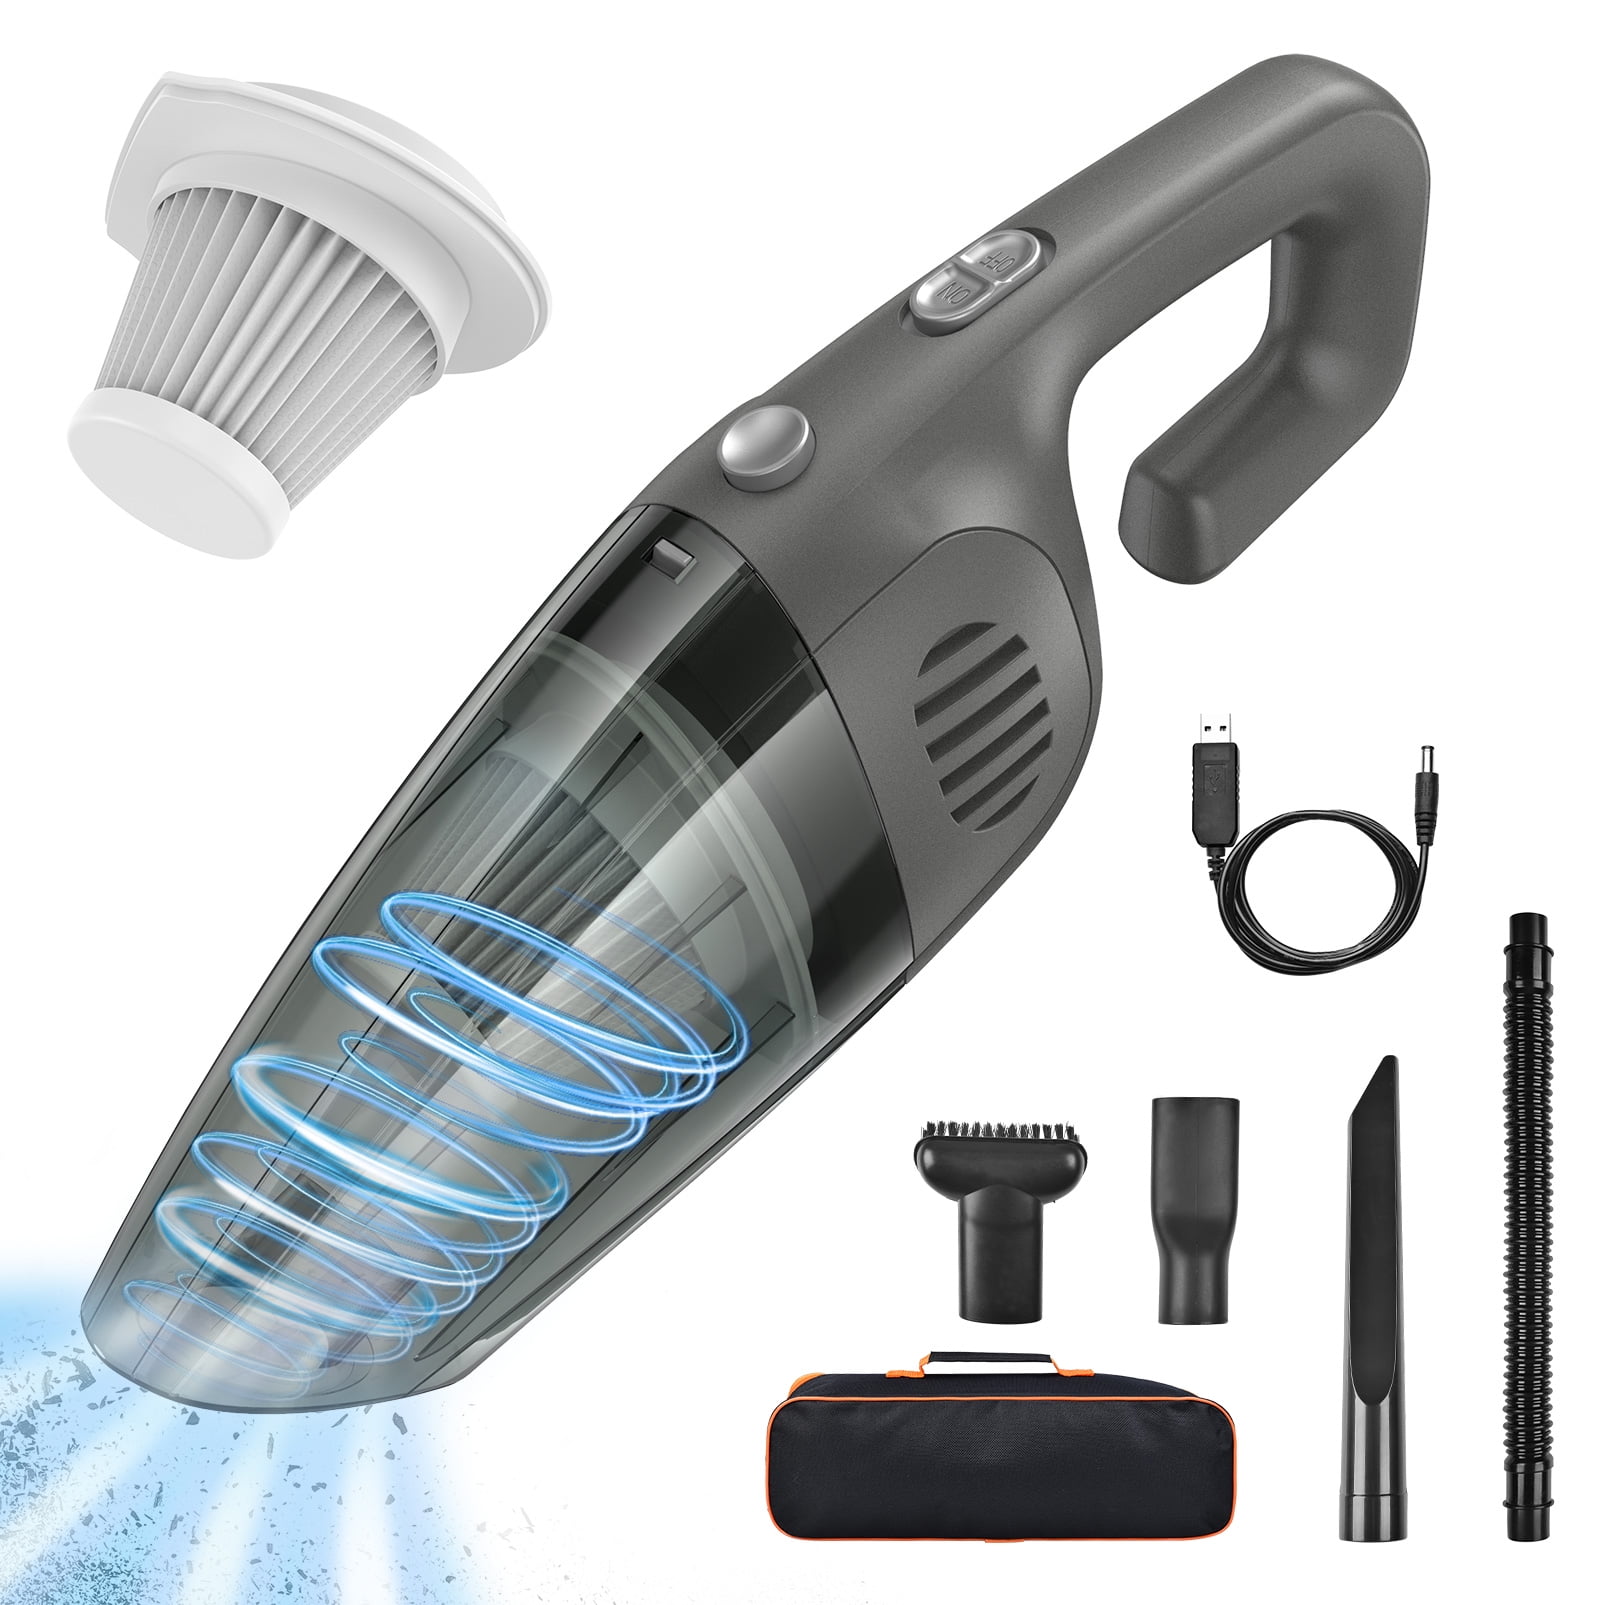 Rechargeable Handheld Vacuum Cleaner Cordless Dust Pet Hair Suction Cleaning Set 